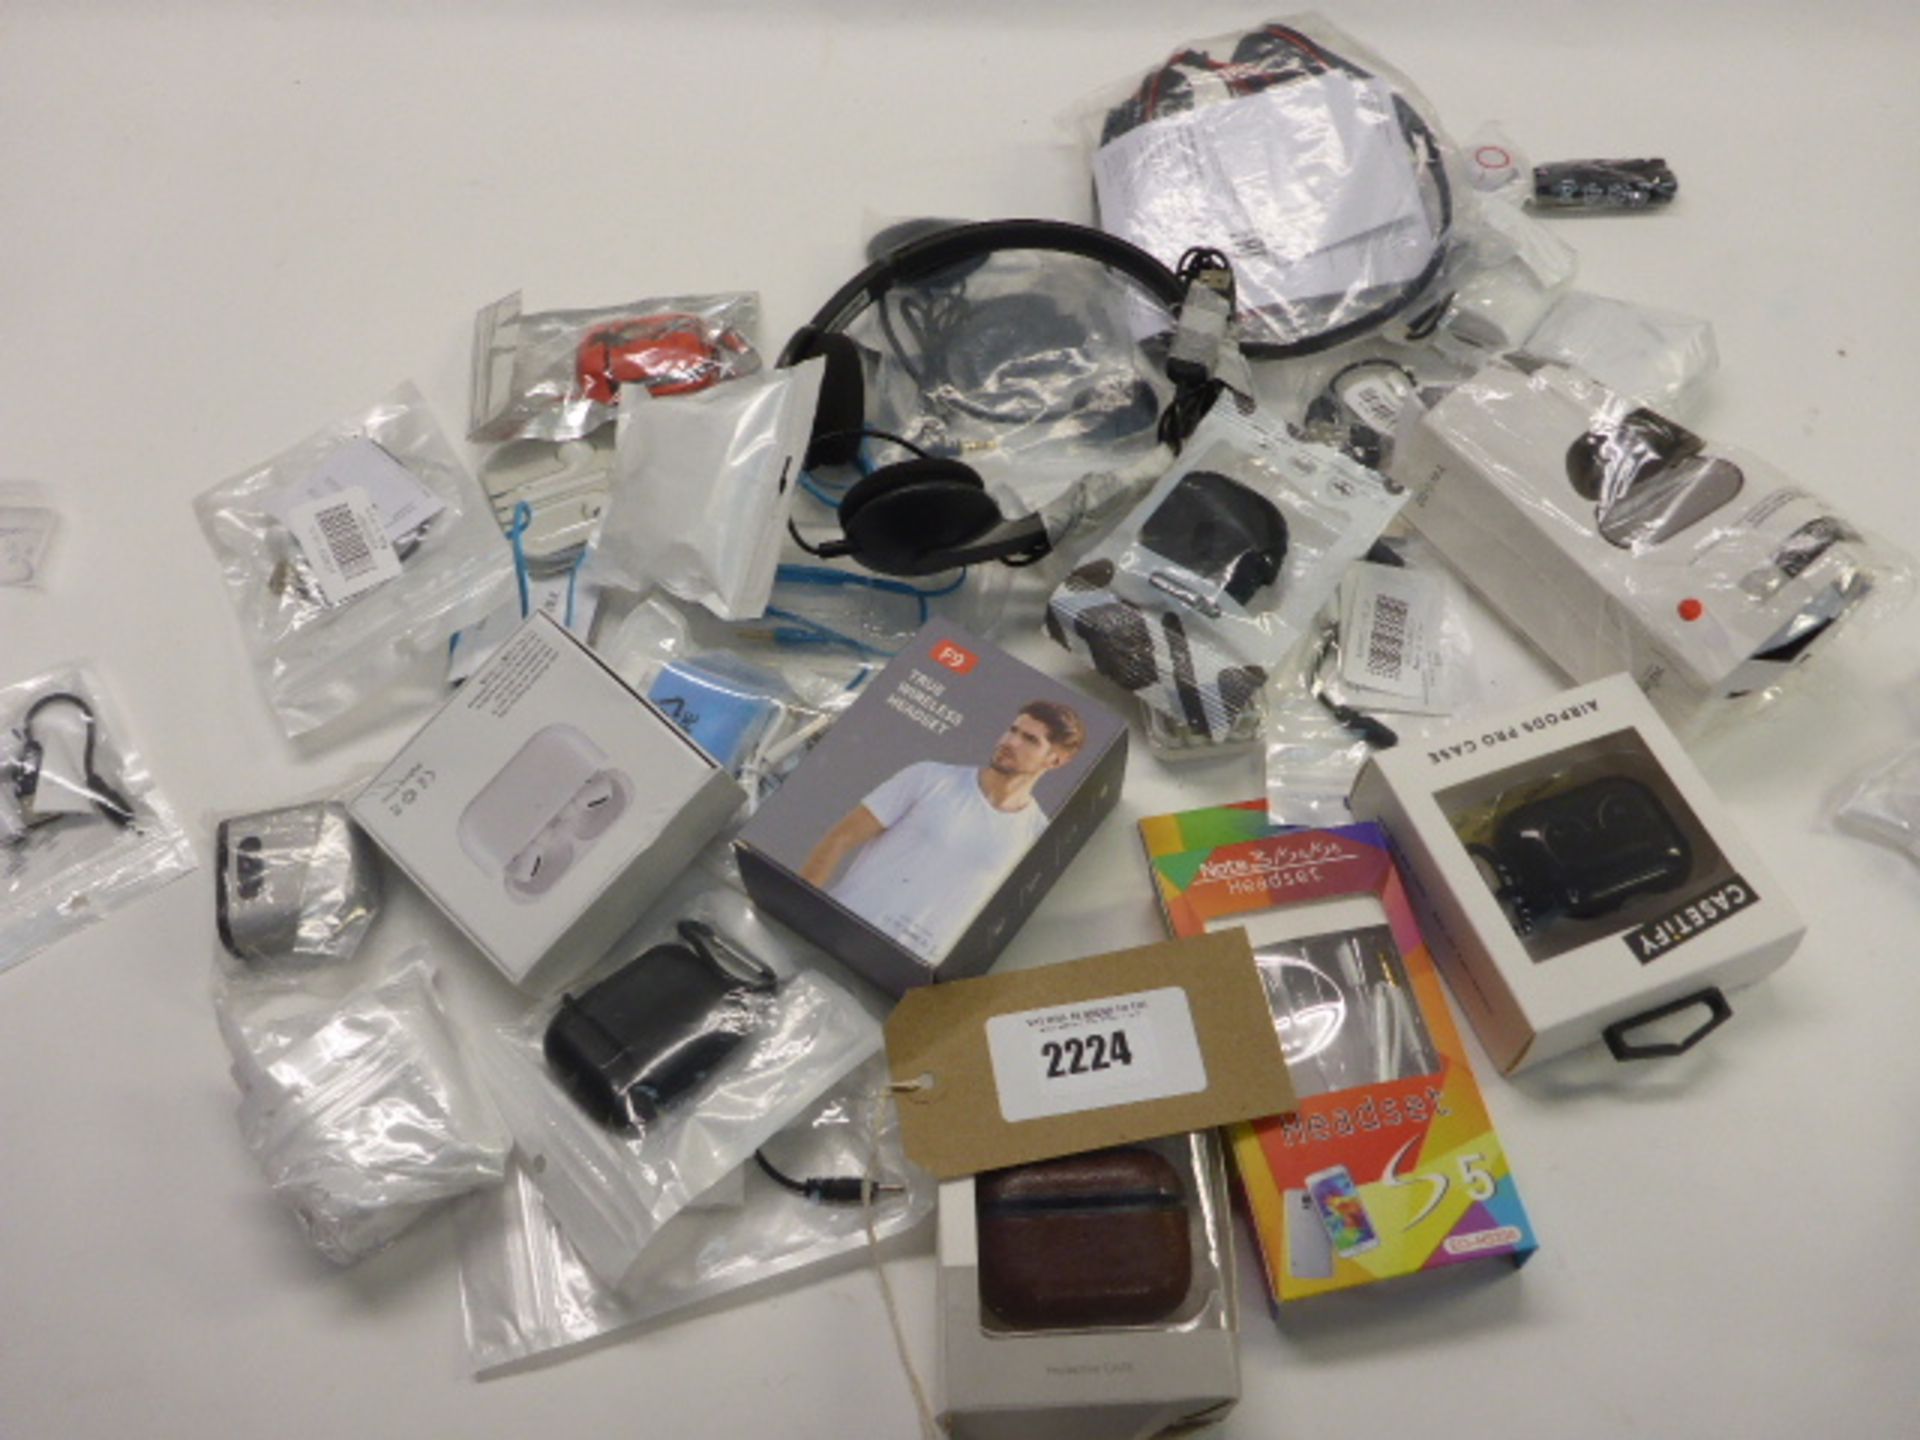 Bag containing quantity of wireless earphones, earphone accessories and headsets